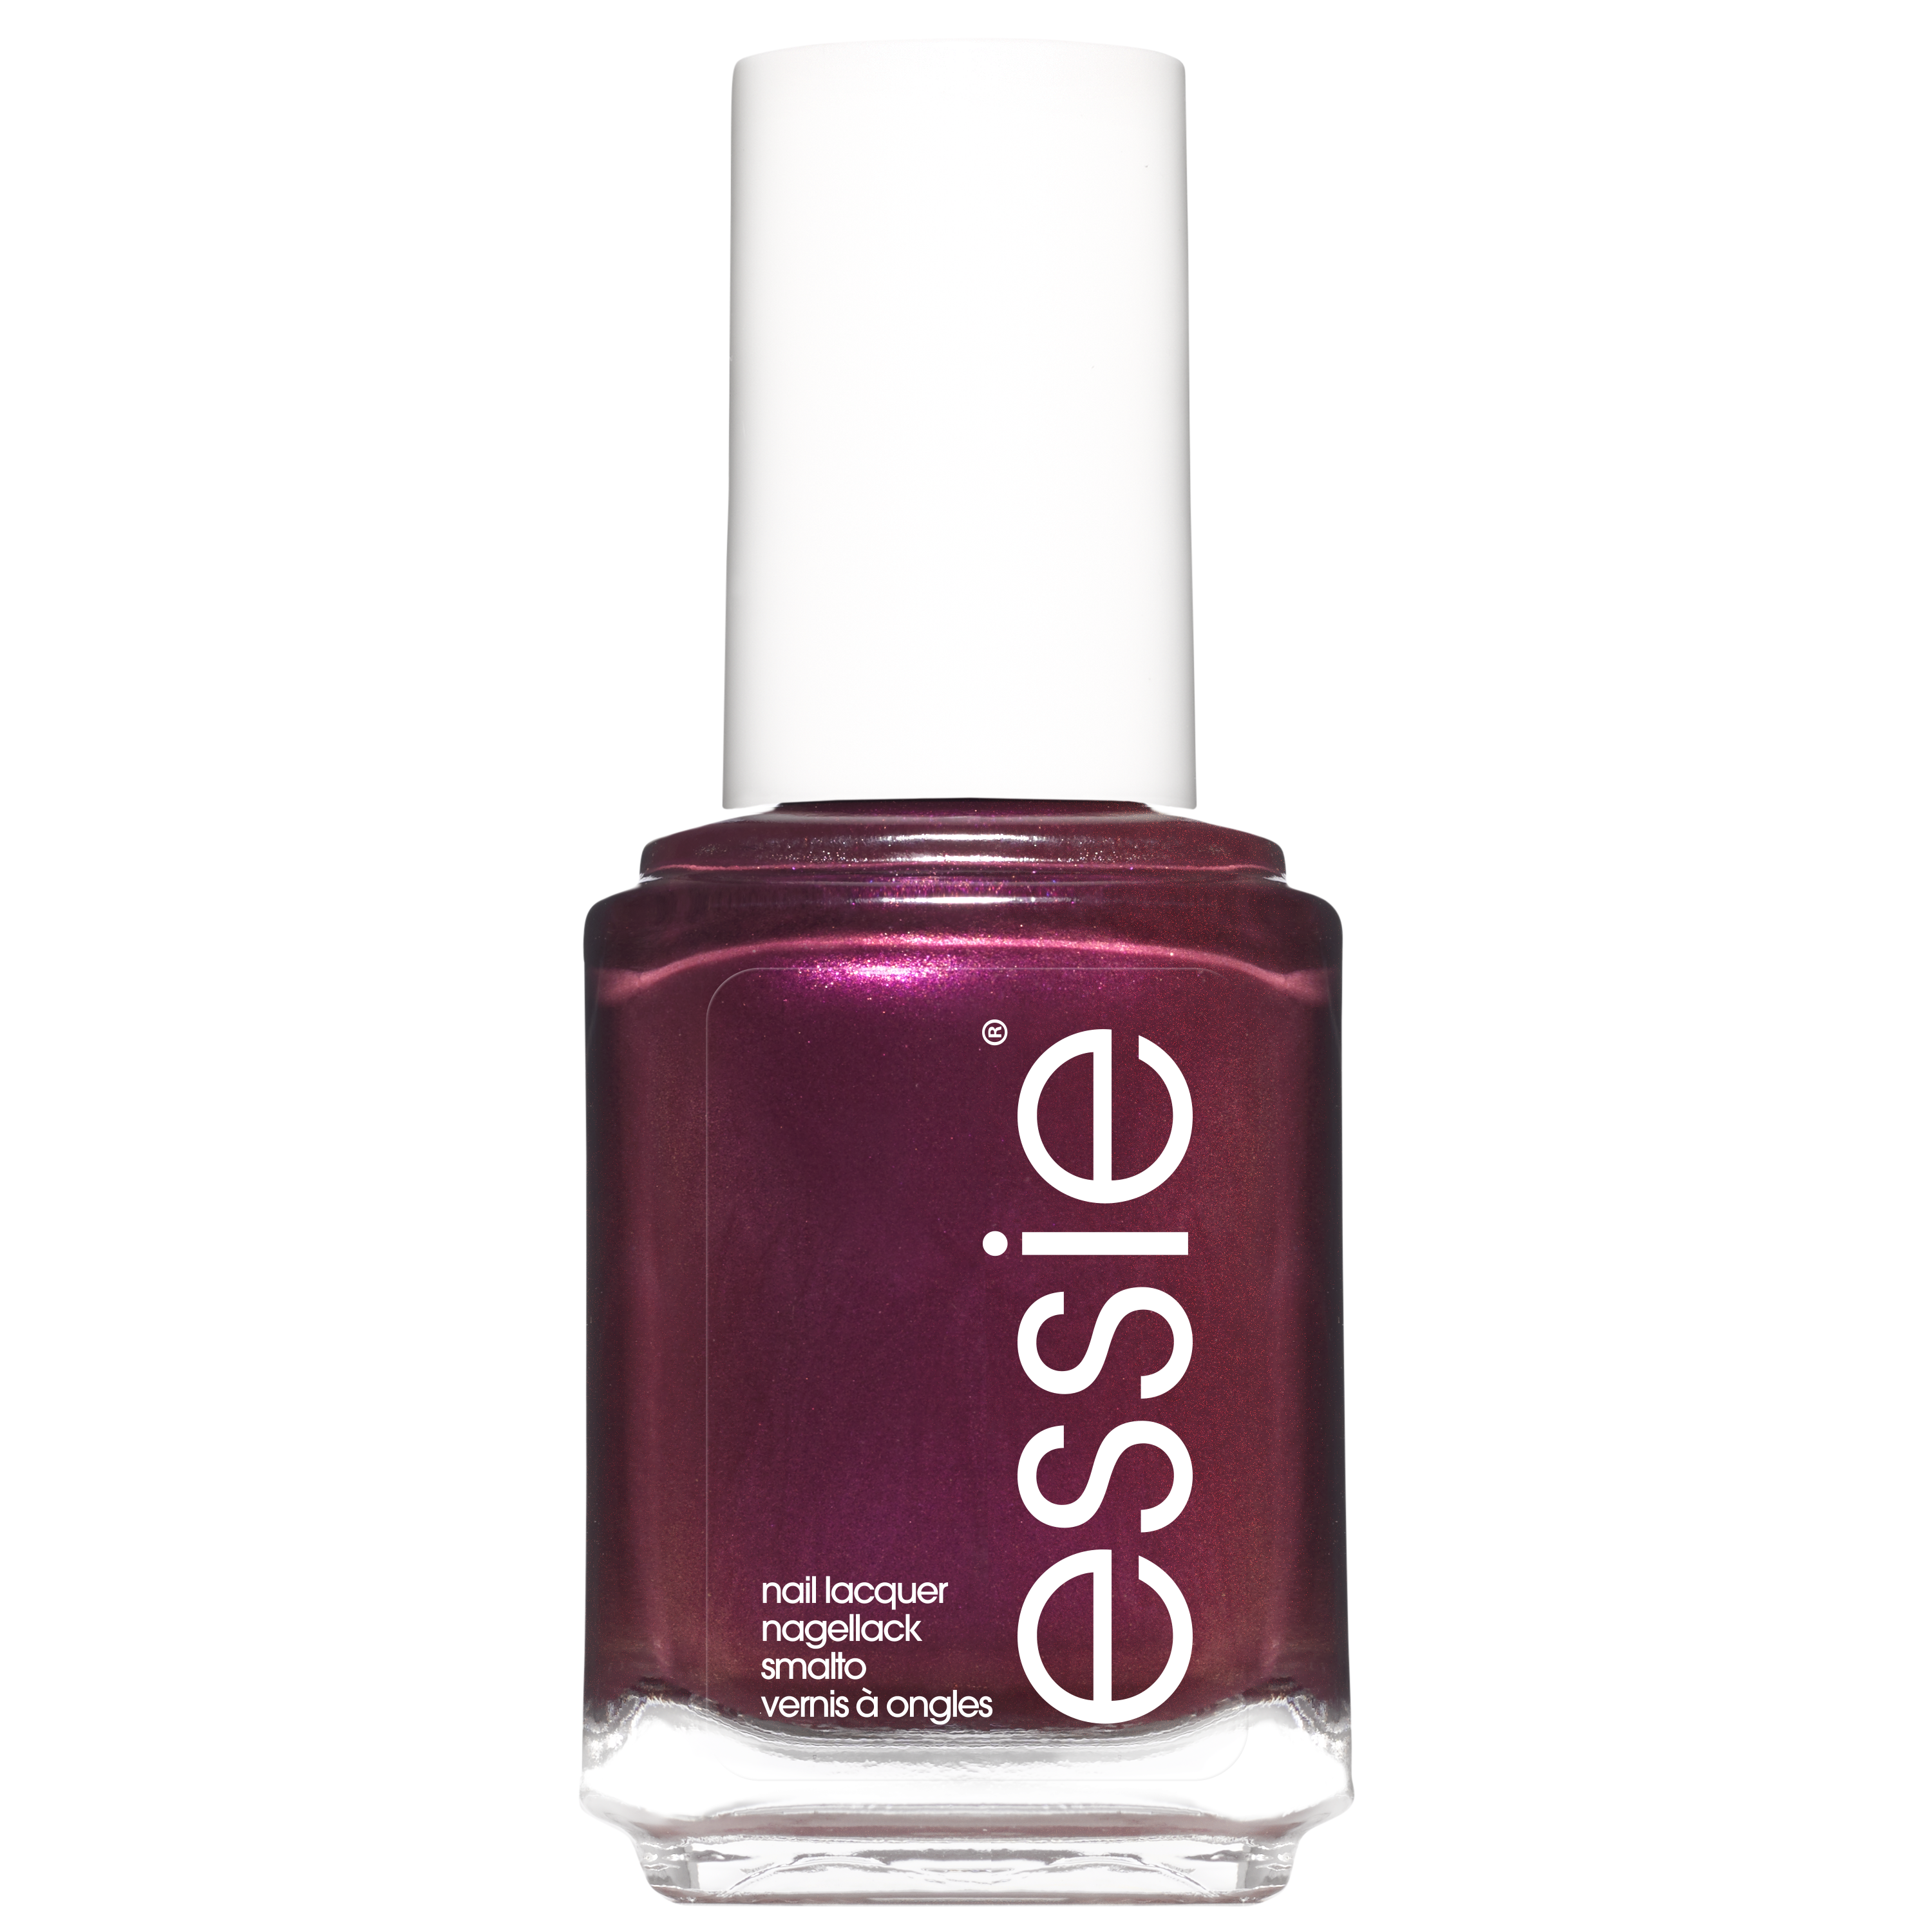 Essie flying solo collectie flying solo limited edition - 682 without reservations - paars - parelmoer nagellak - 13,5 ml